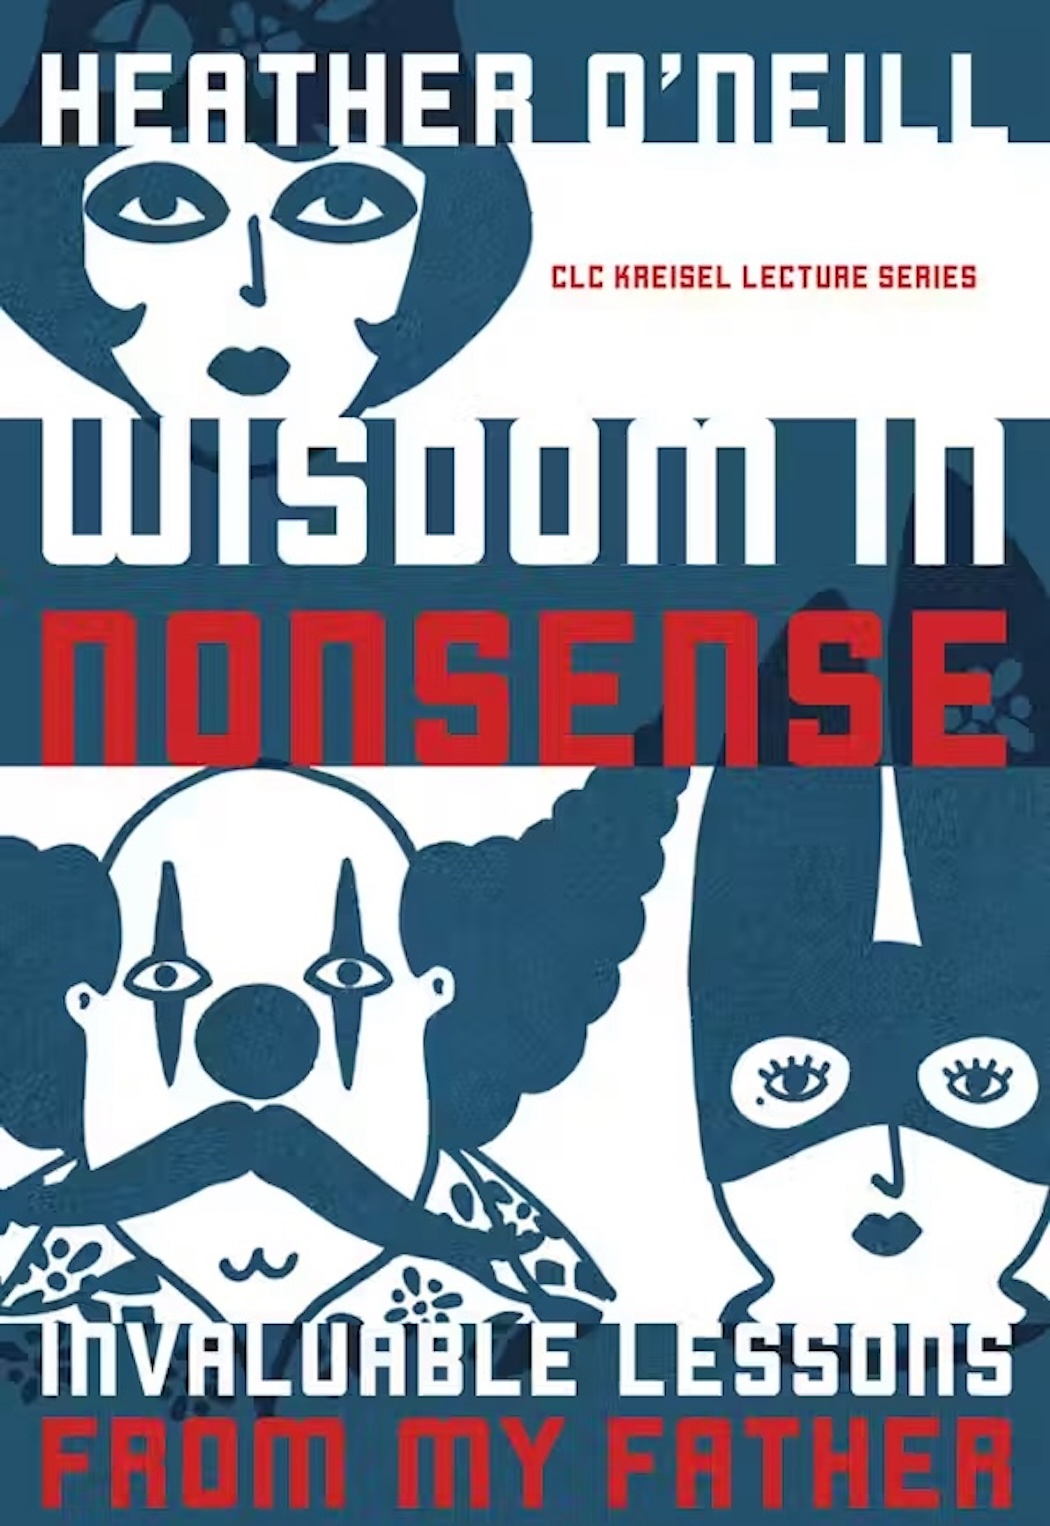 Cover Image of Heather O'Neill's Kreisel Publication Titled Wisdom in Nonsense